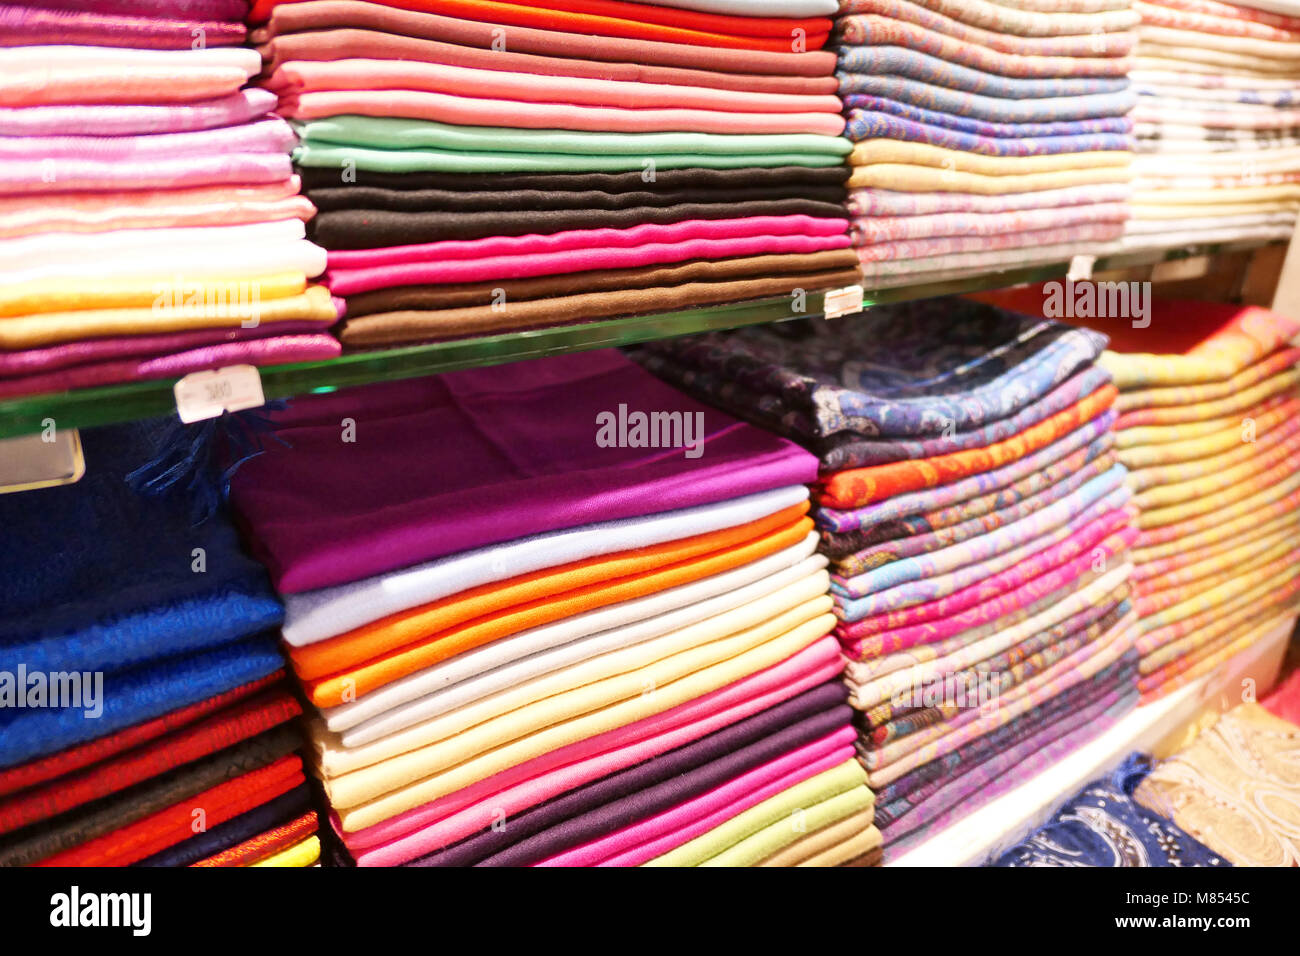 Stacks of colorful headscarfs and textile Stock Photo